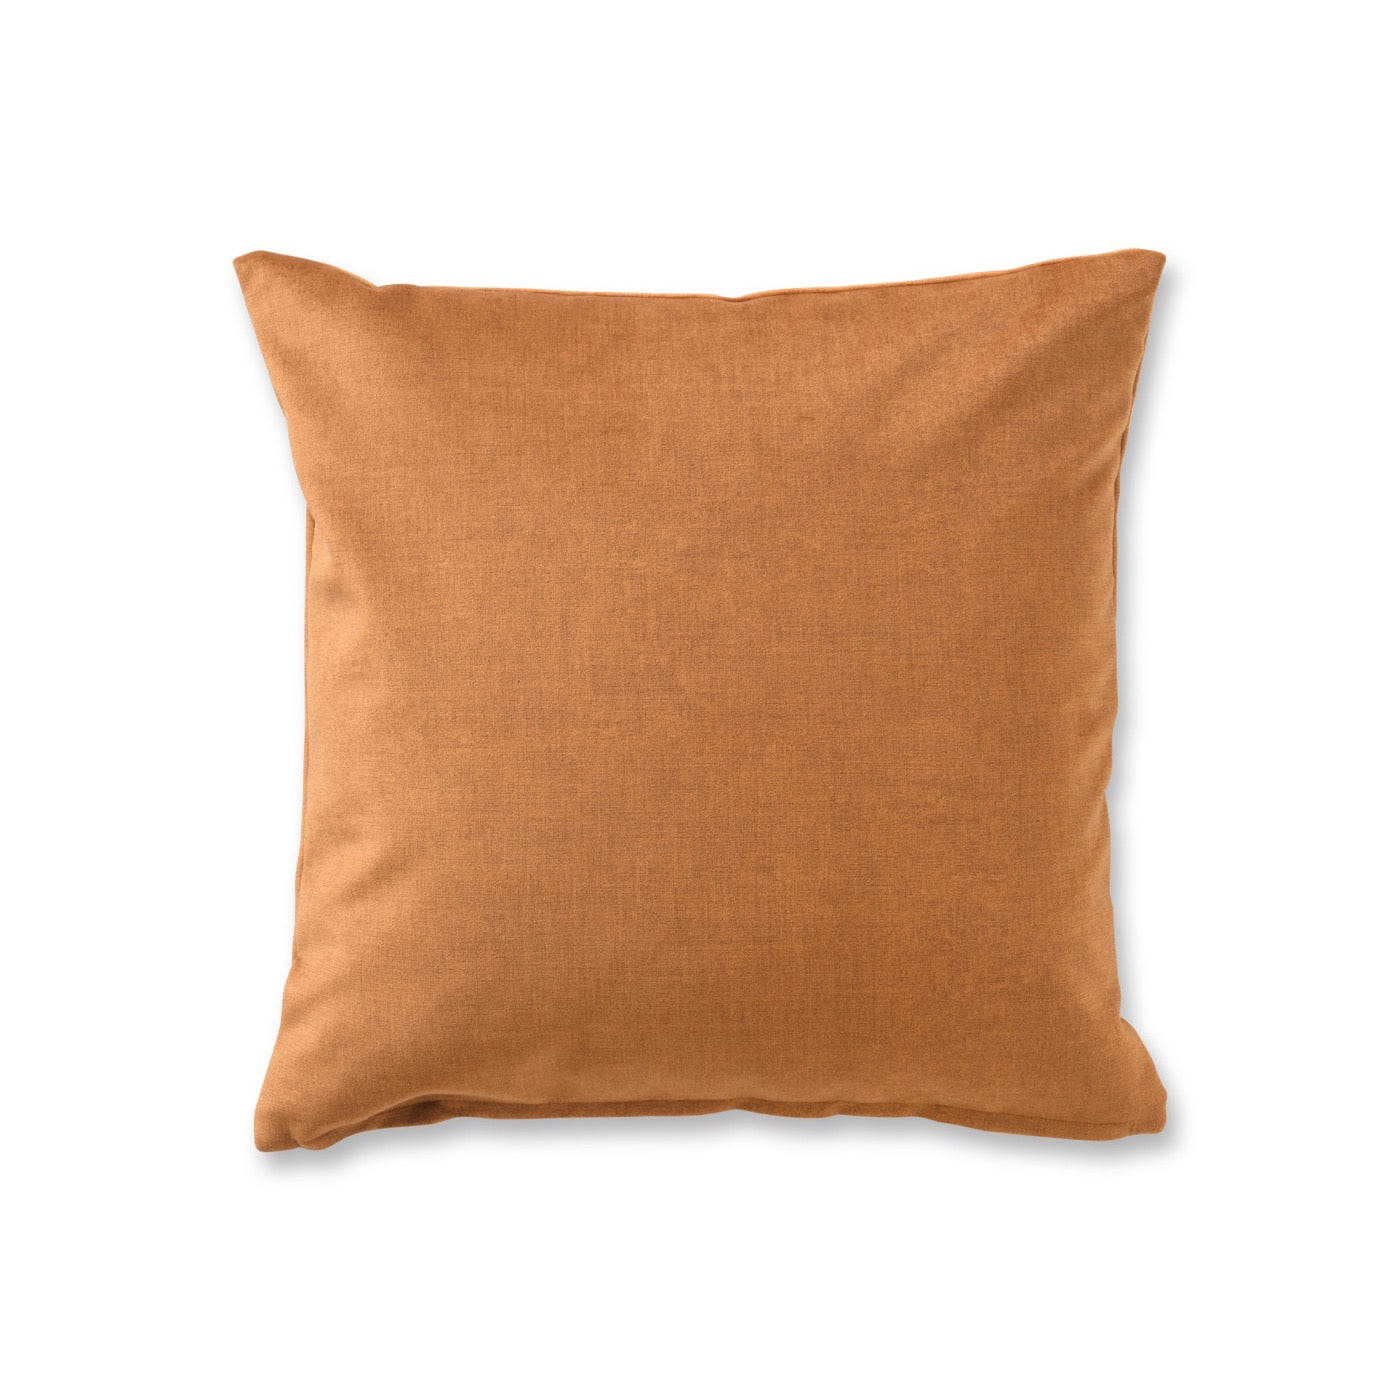 CUSHION  DELUXE20  450×450mm